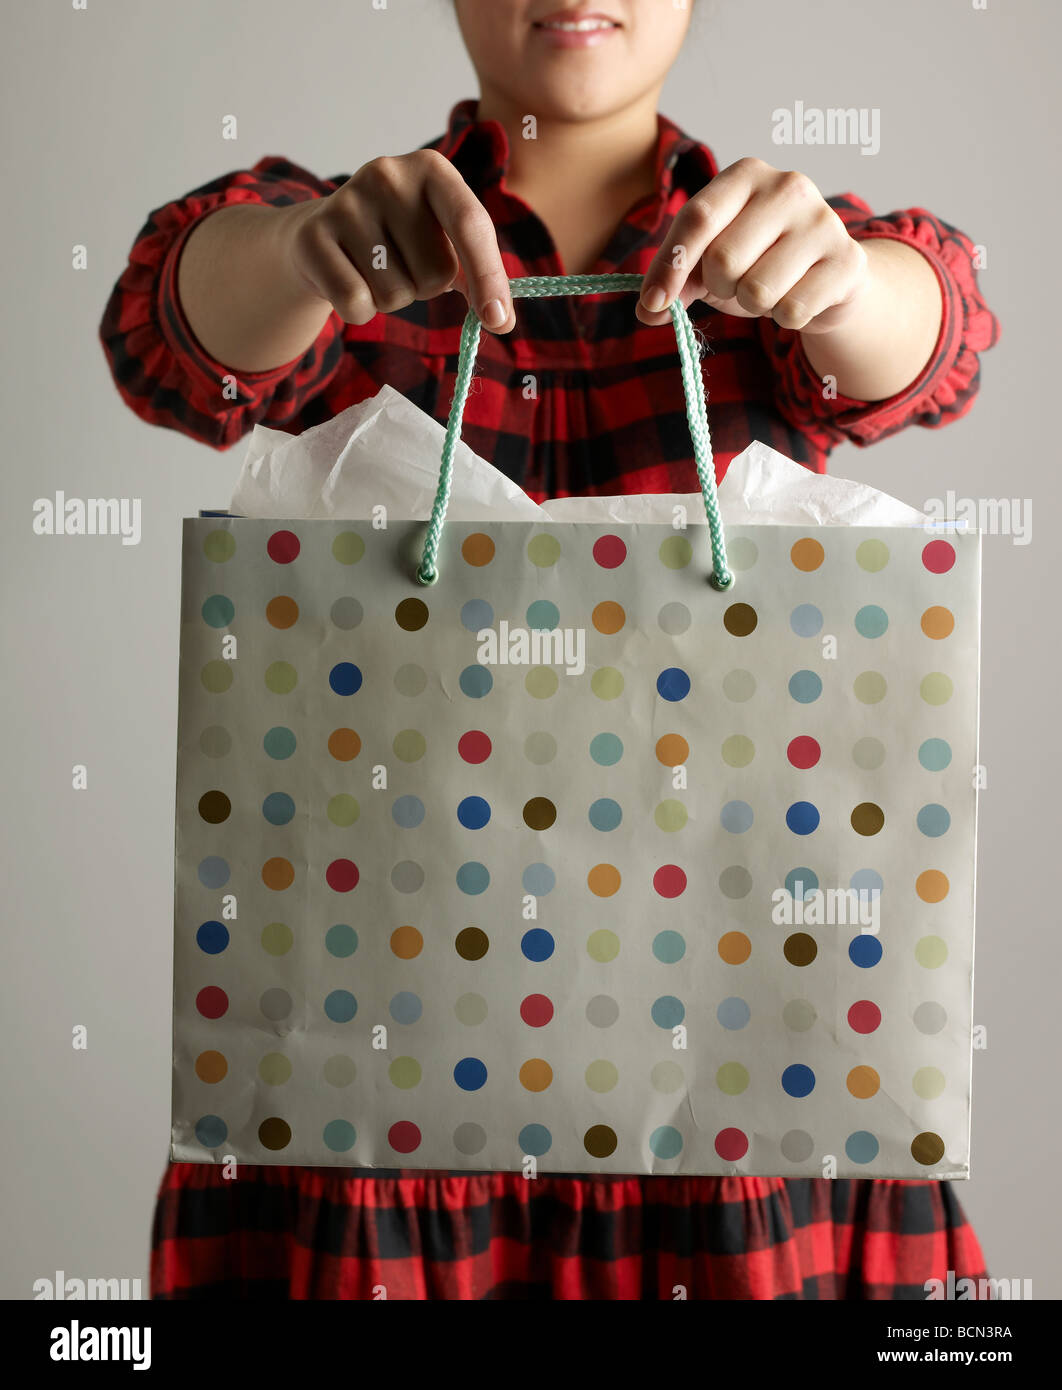 Mid-Adult Woman Holding Shopping Bag Stock Photo